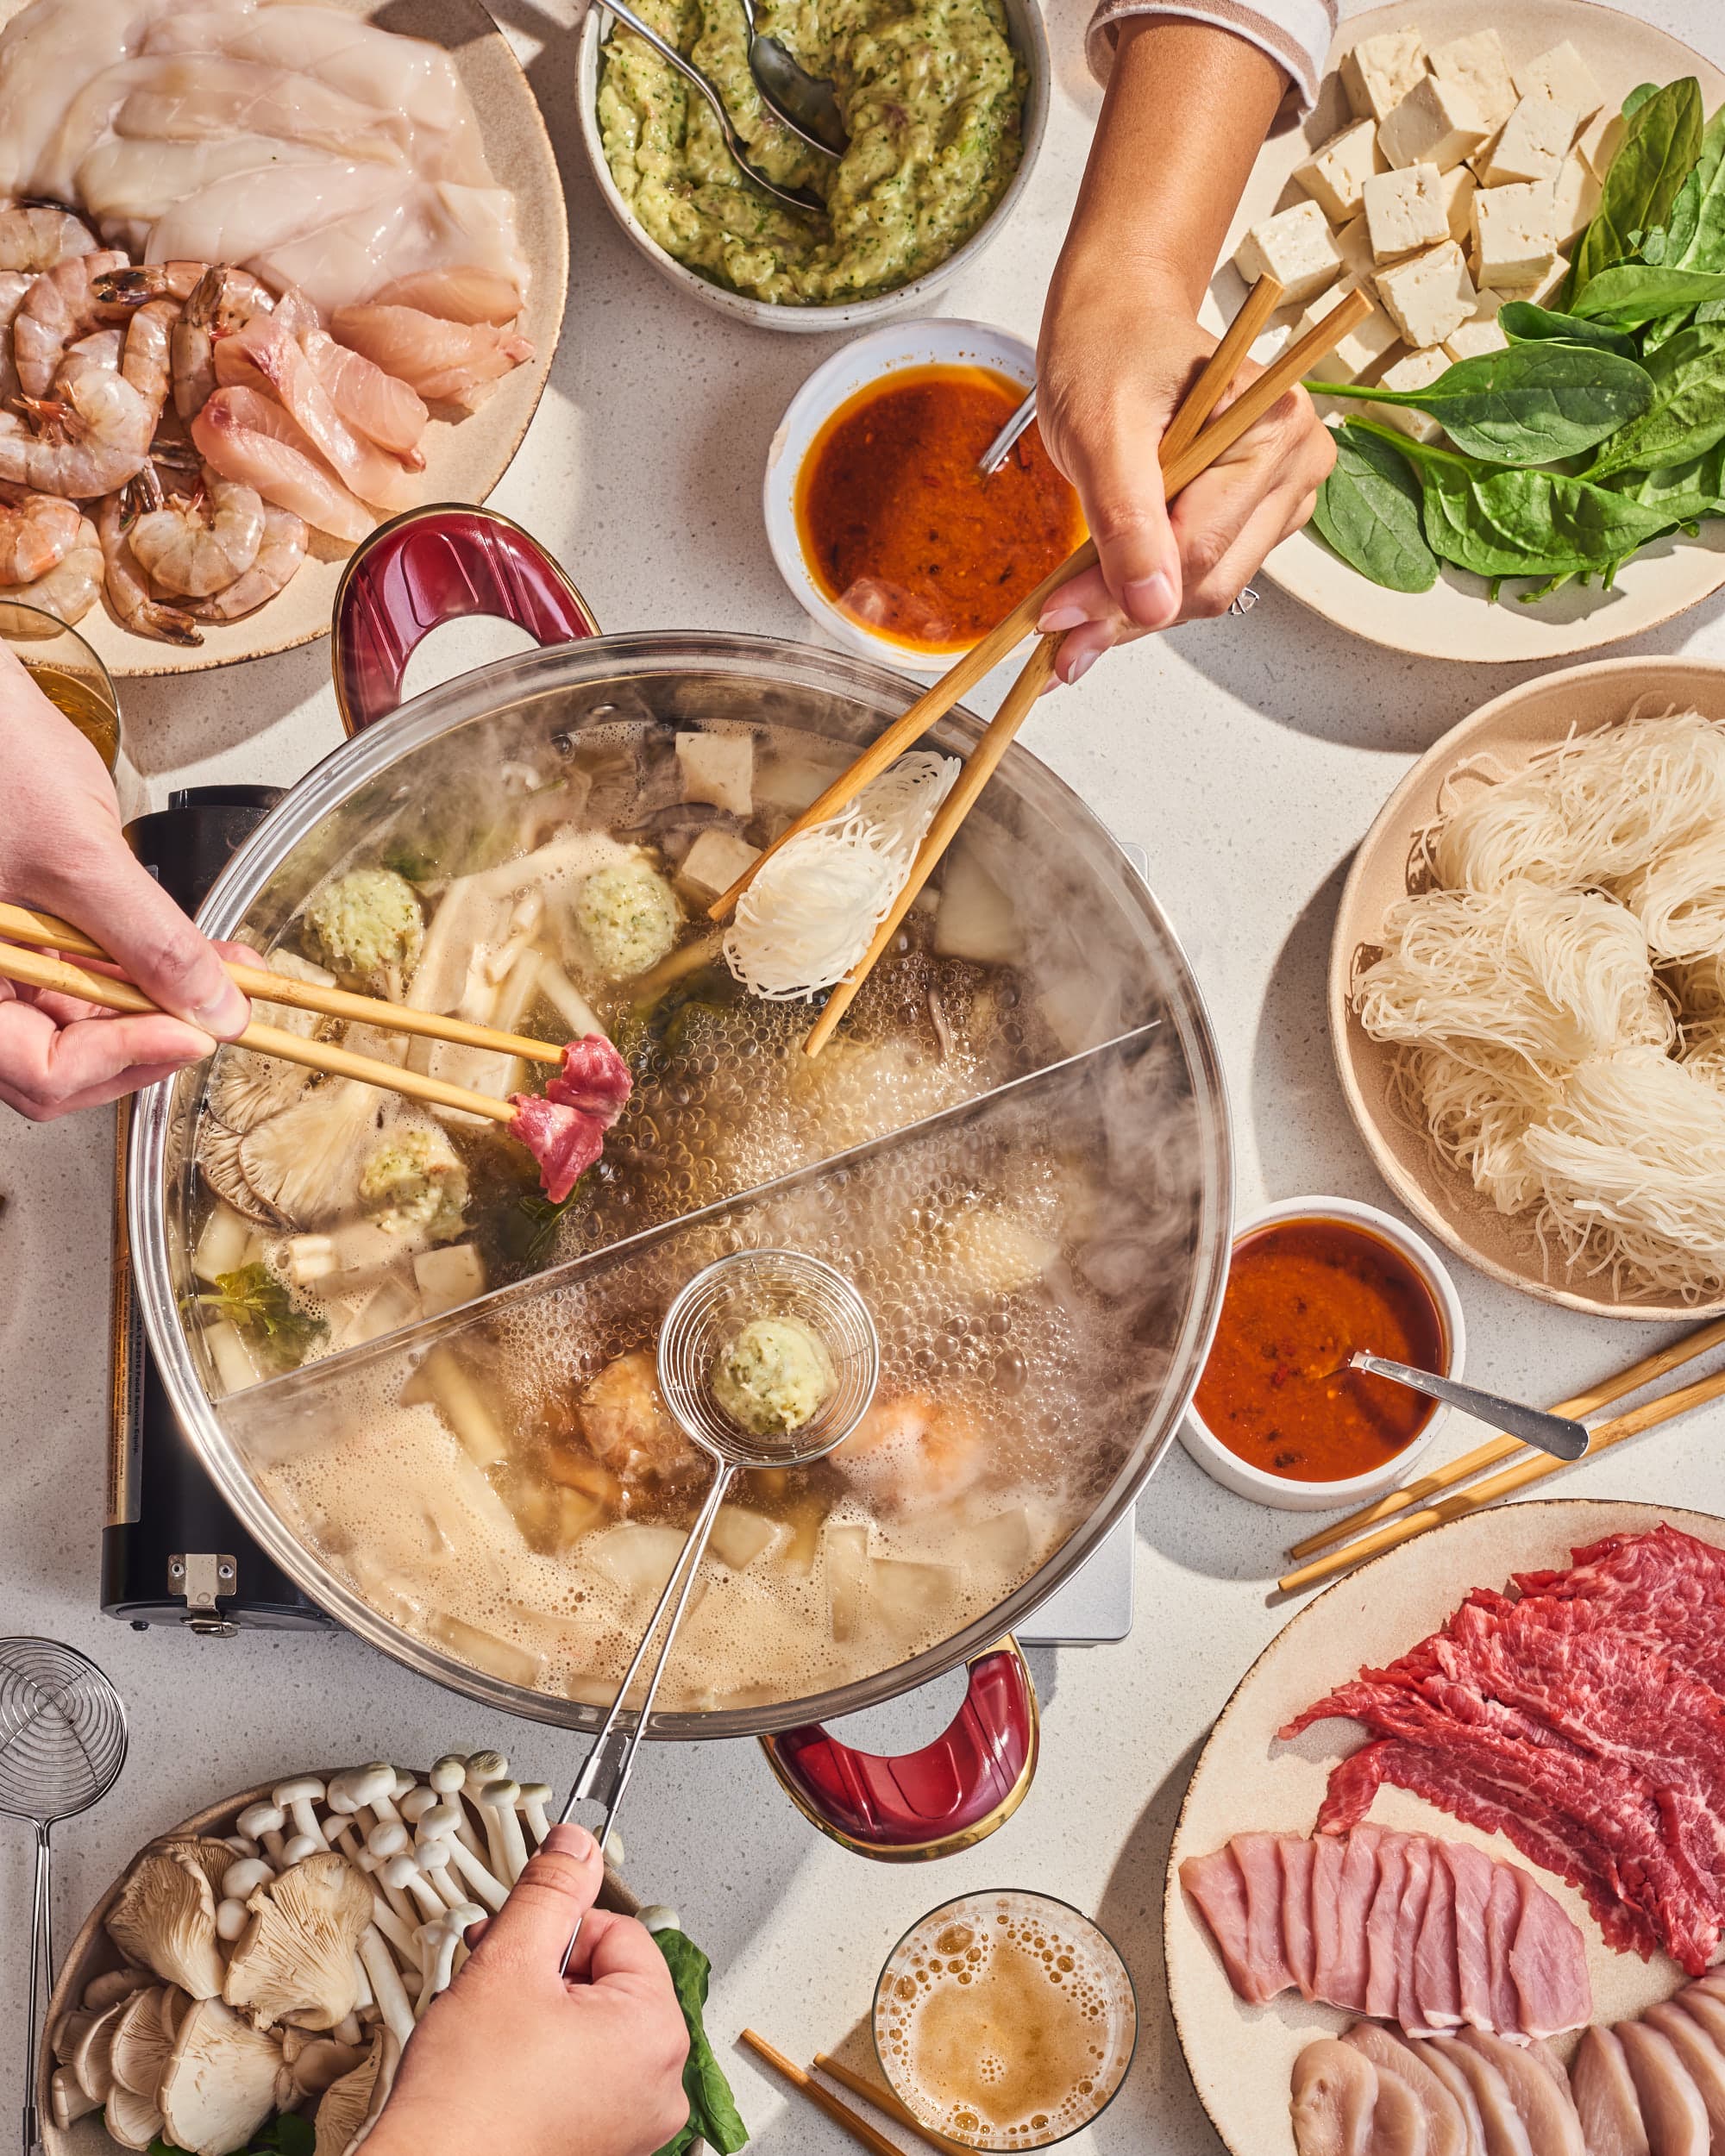 How To Order and Eat Chinese Hot Pot